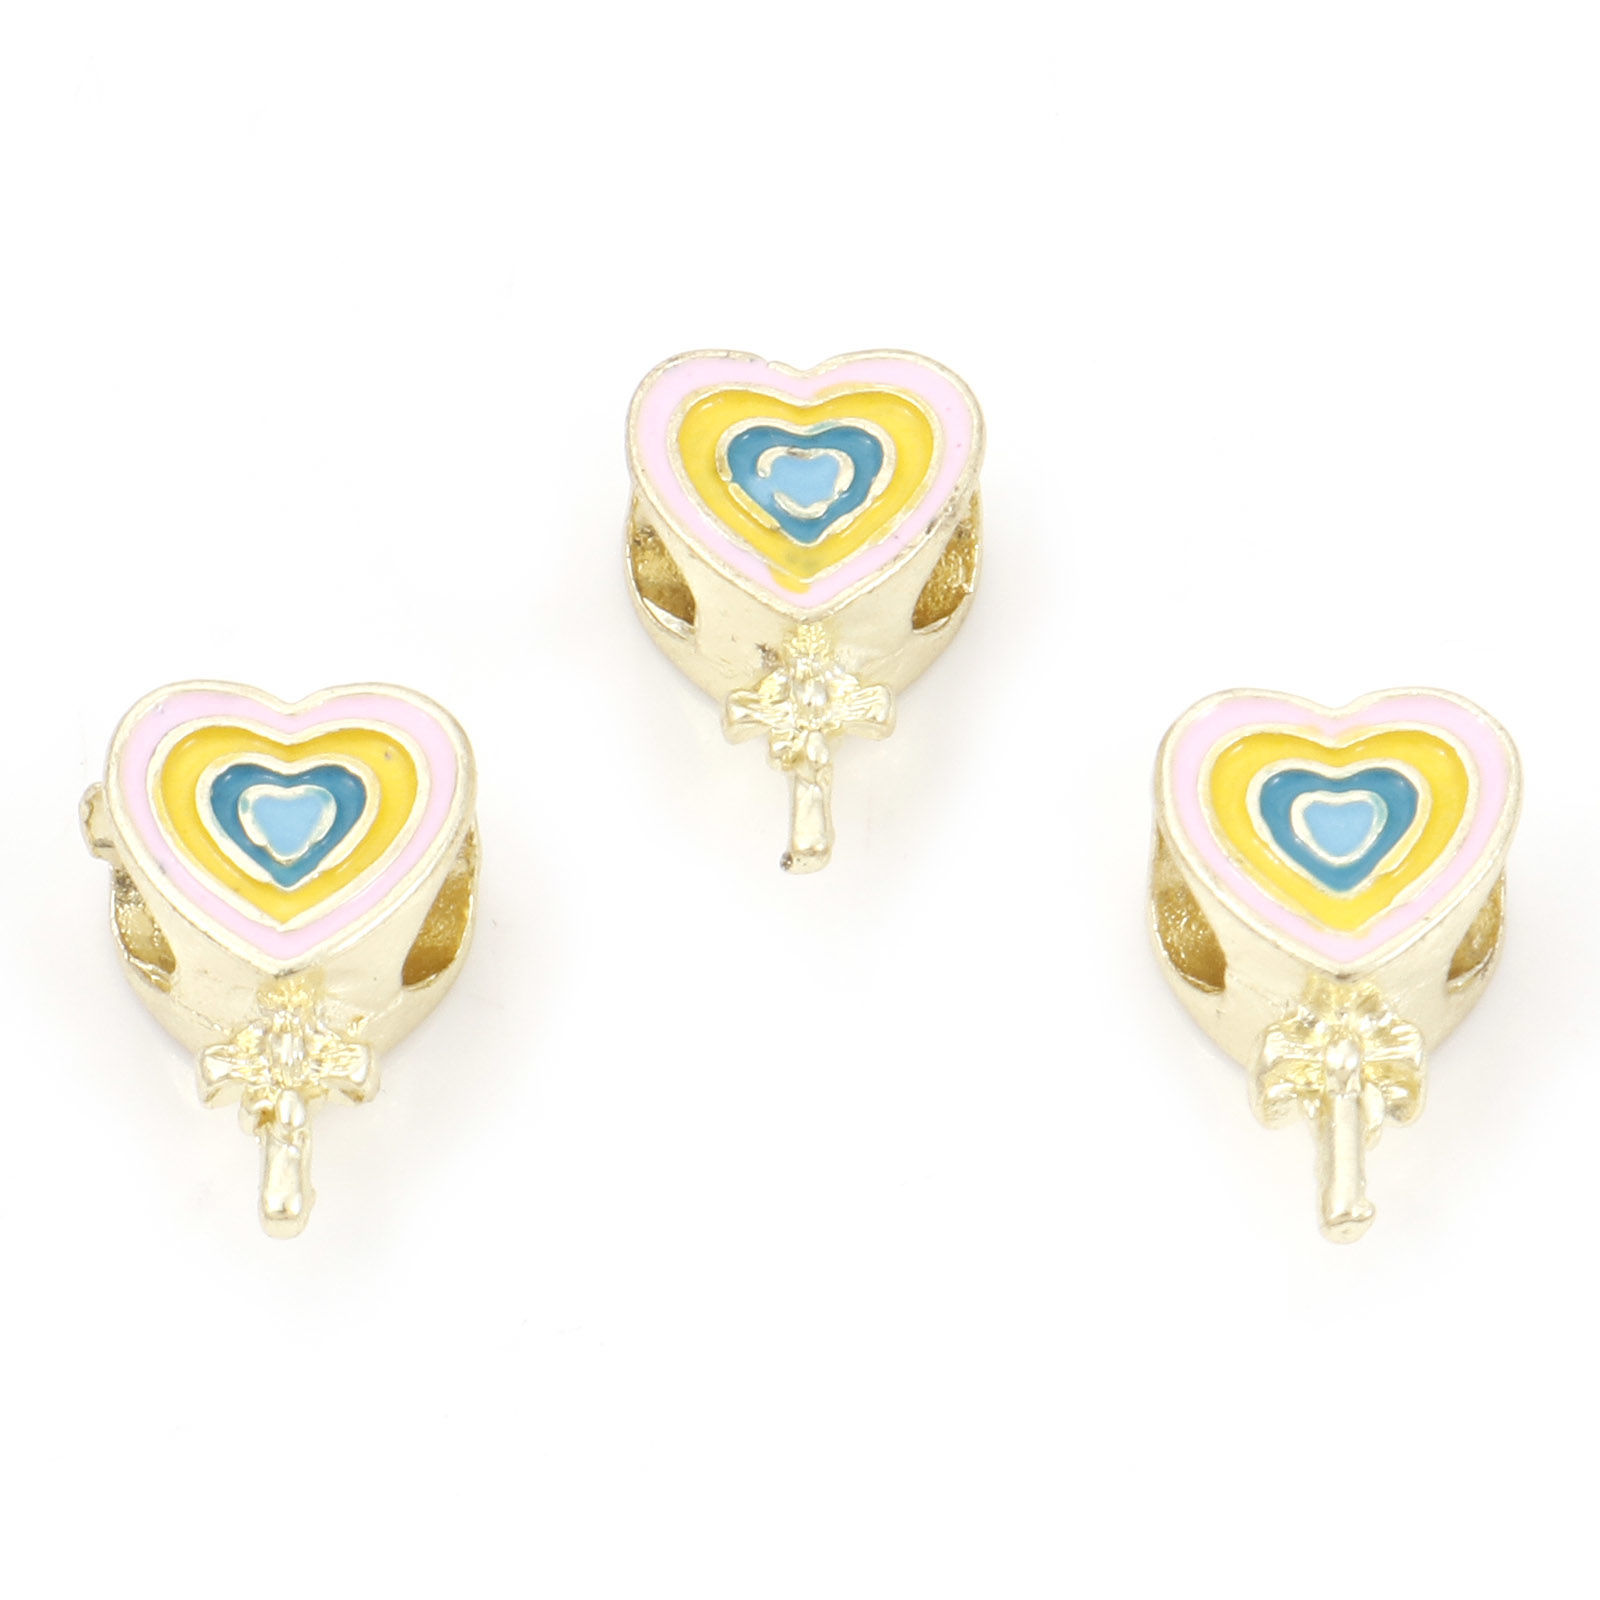 Picture of Zinc Based Alloy European Style Large Hole Charm Beads Gold Plated Lollipop Enamel 14mm x 9mm, Hole: Approx 4.2mm, 5 PCs